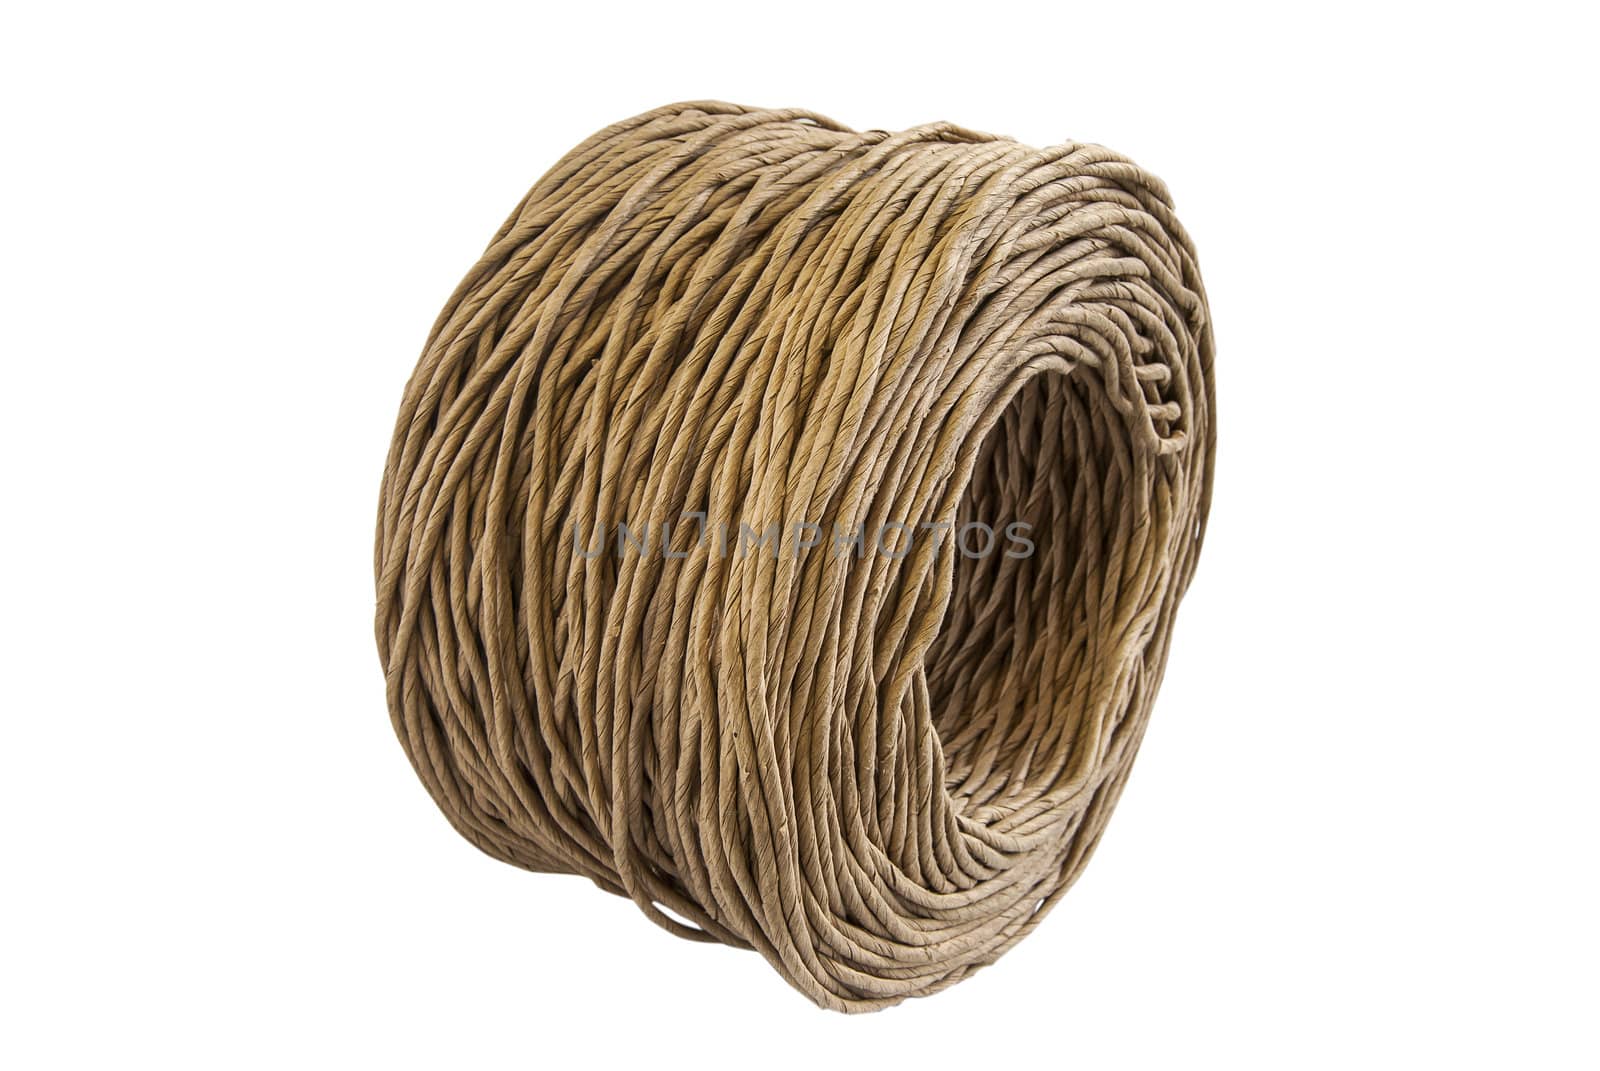 Thick twisted paper cord roll closeup isolated on white background